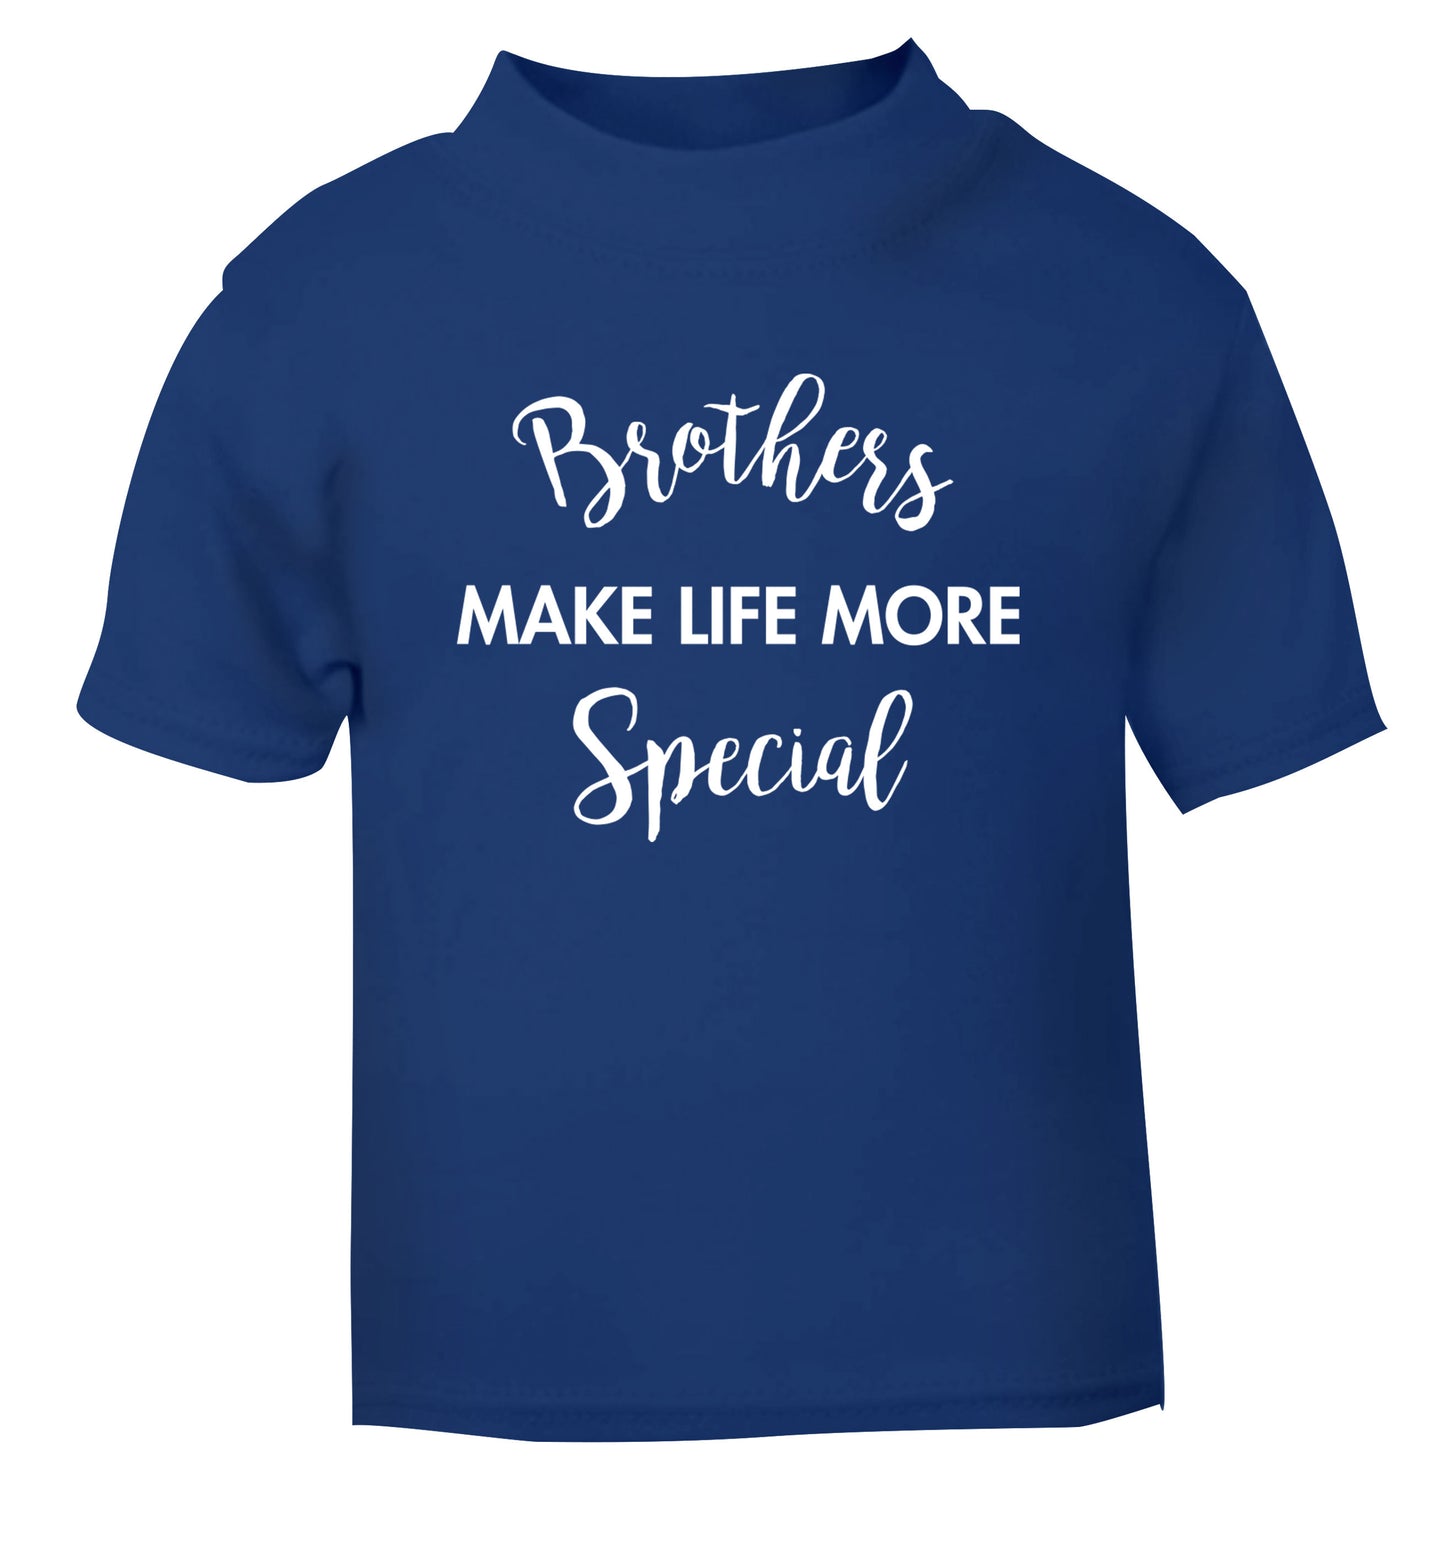 Brothers make life more special blue Baby Toddler Tshirt 2 Years